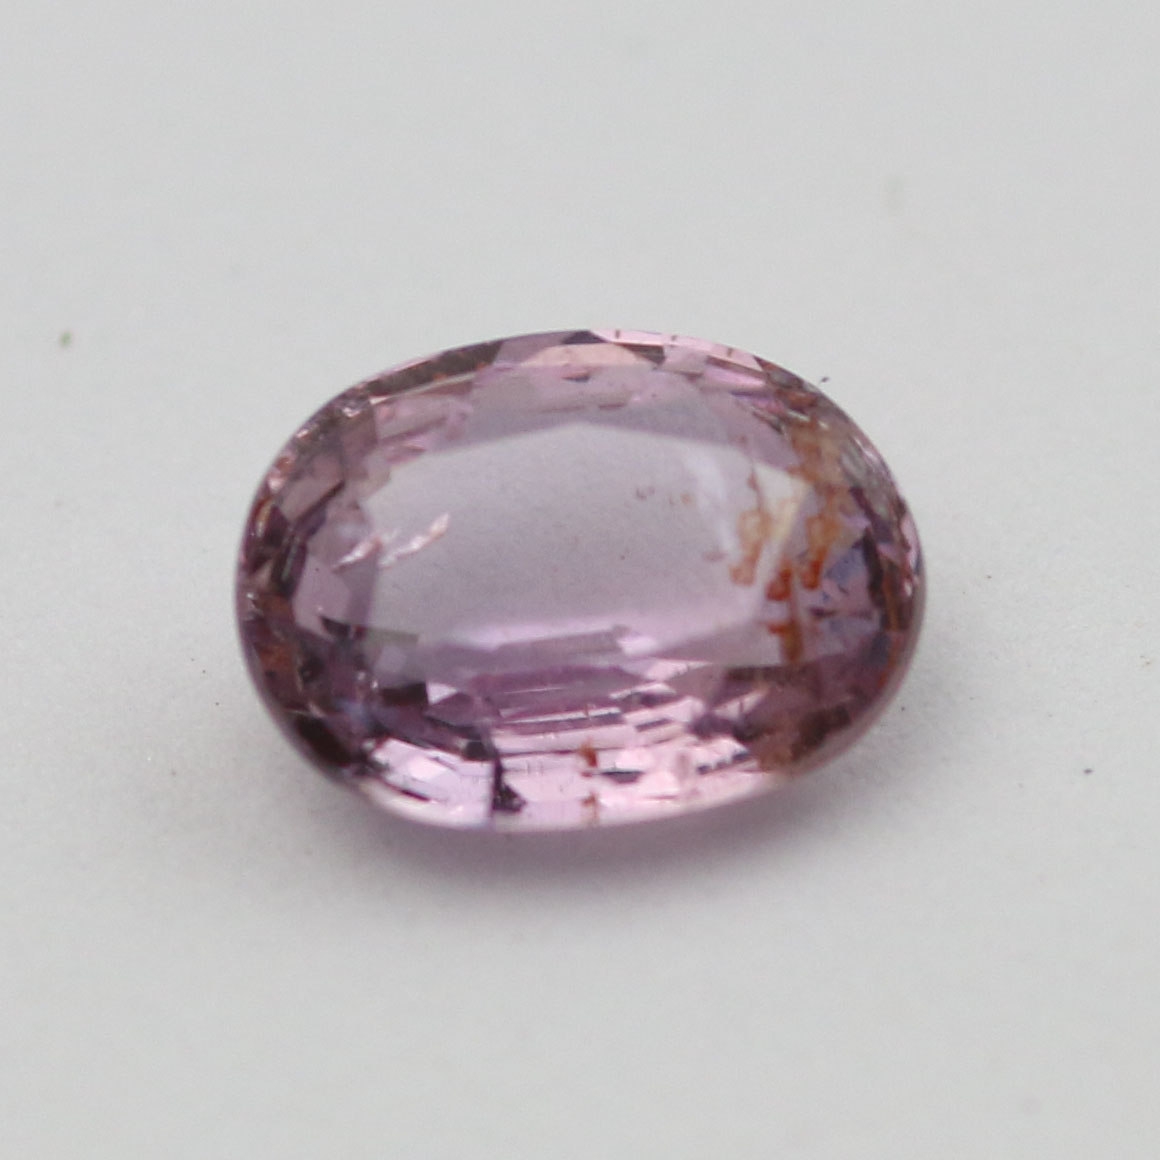 PINK SAPPHIRE 8X6.1 OVAL